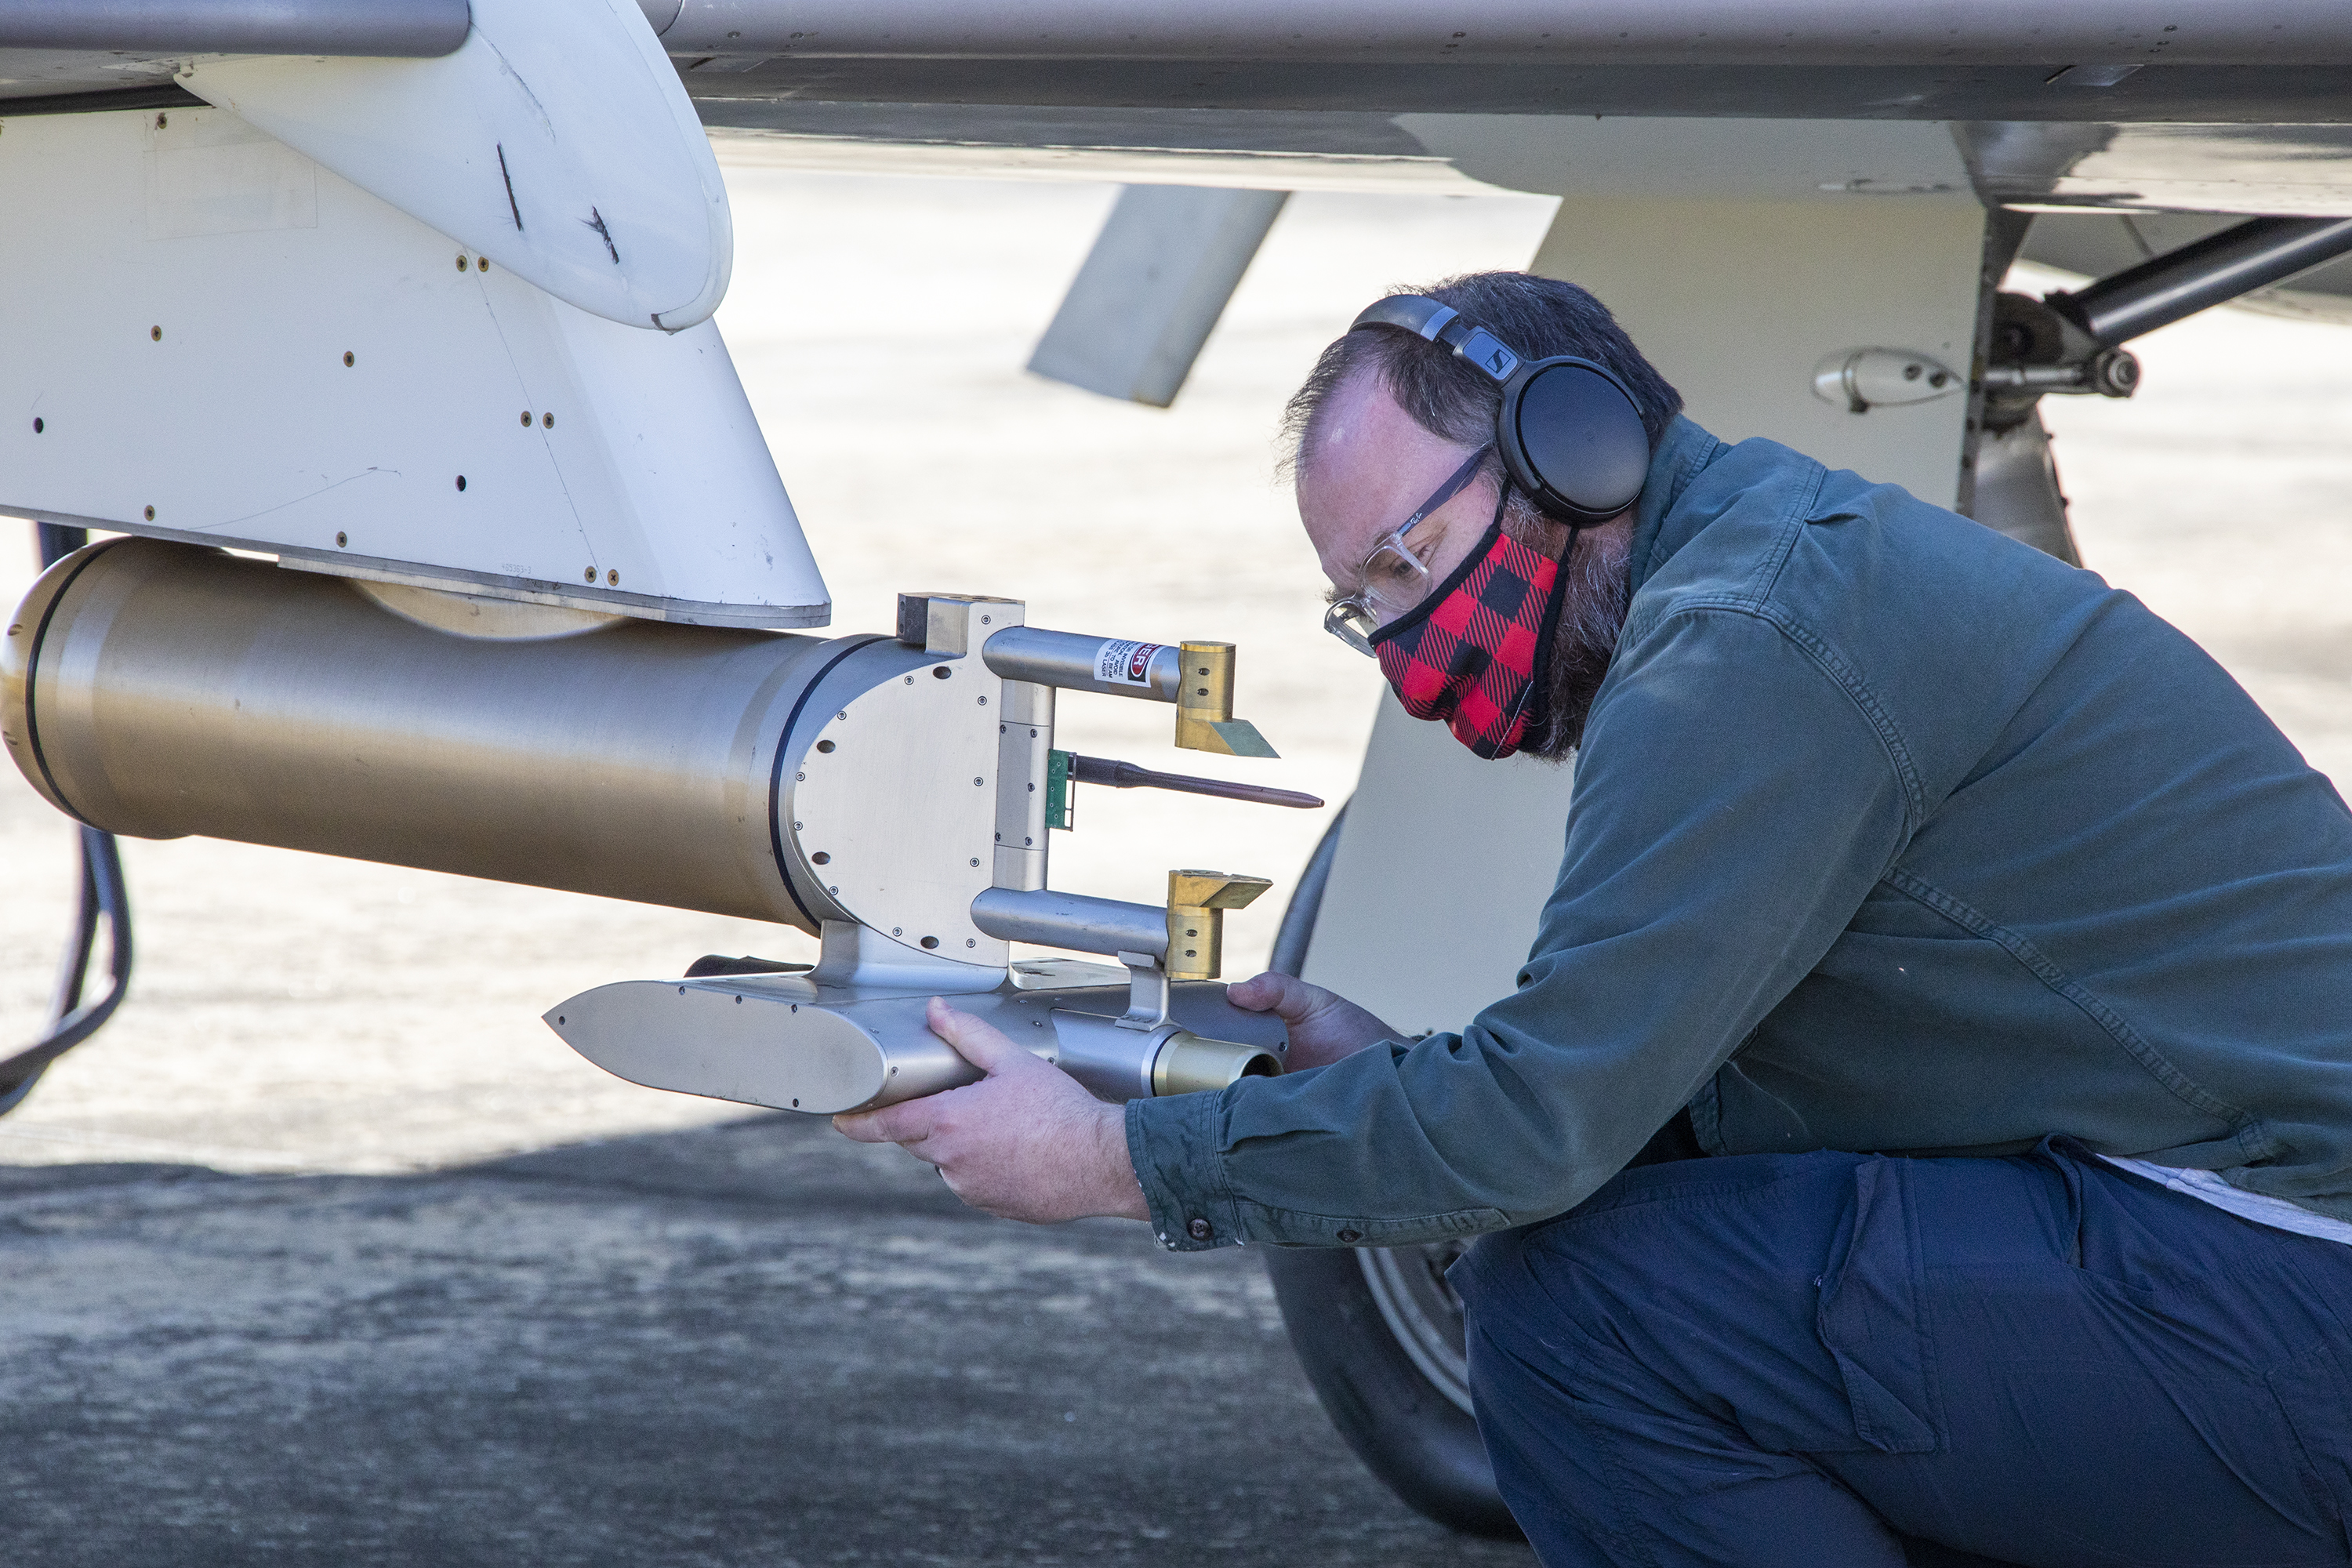 A researcher checks an instrument on an airplane prior to a flight.